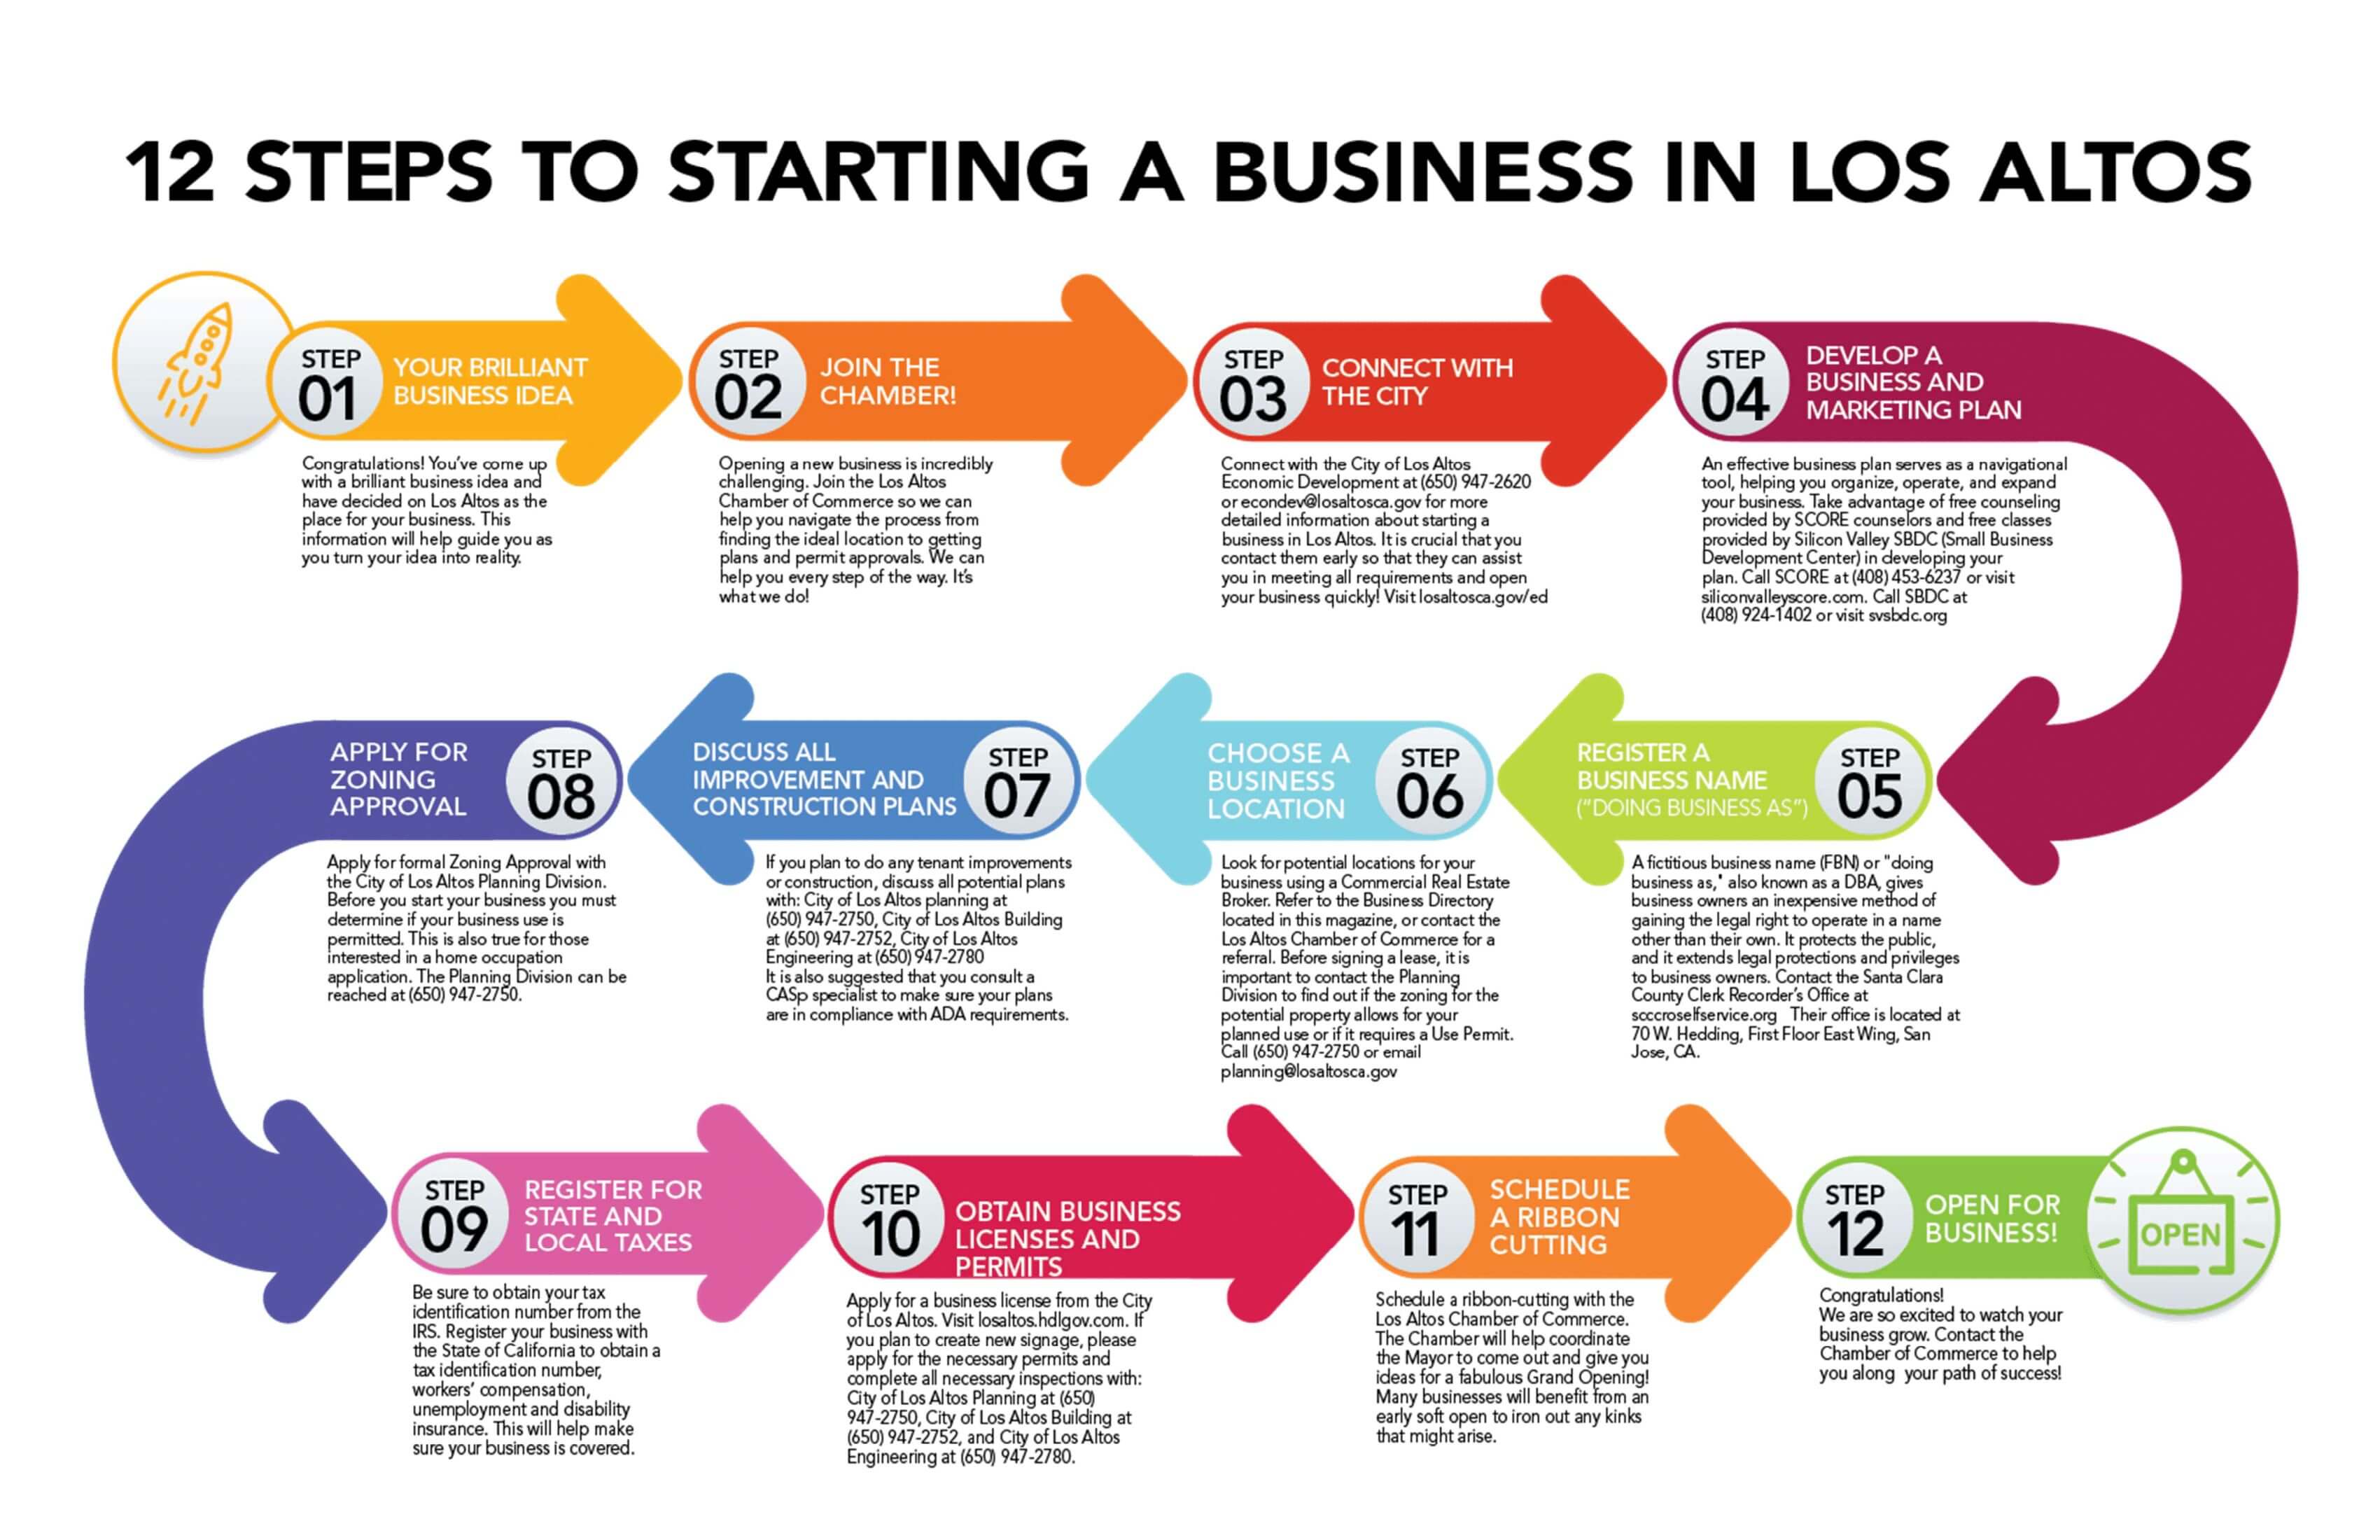 12 Steps to Starting a Business in Los Altos-1